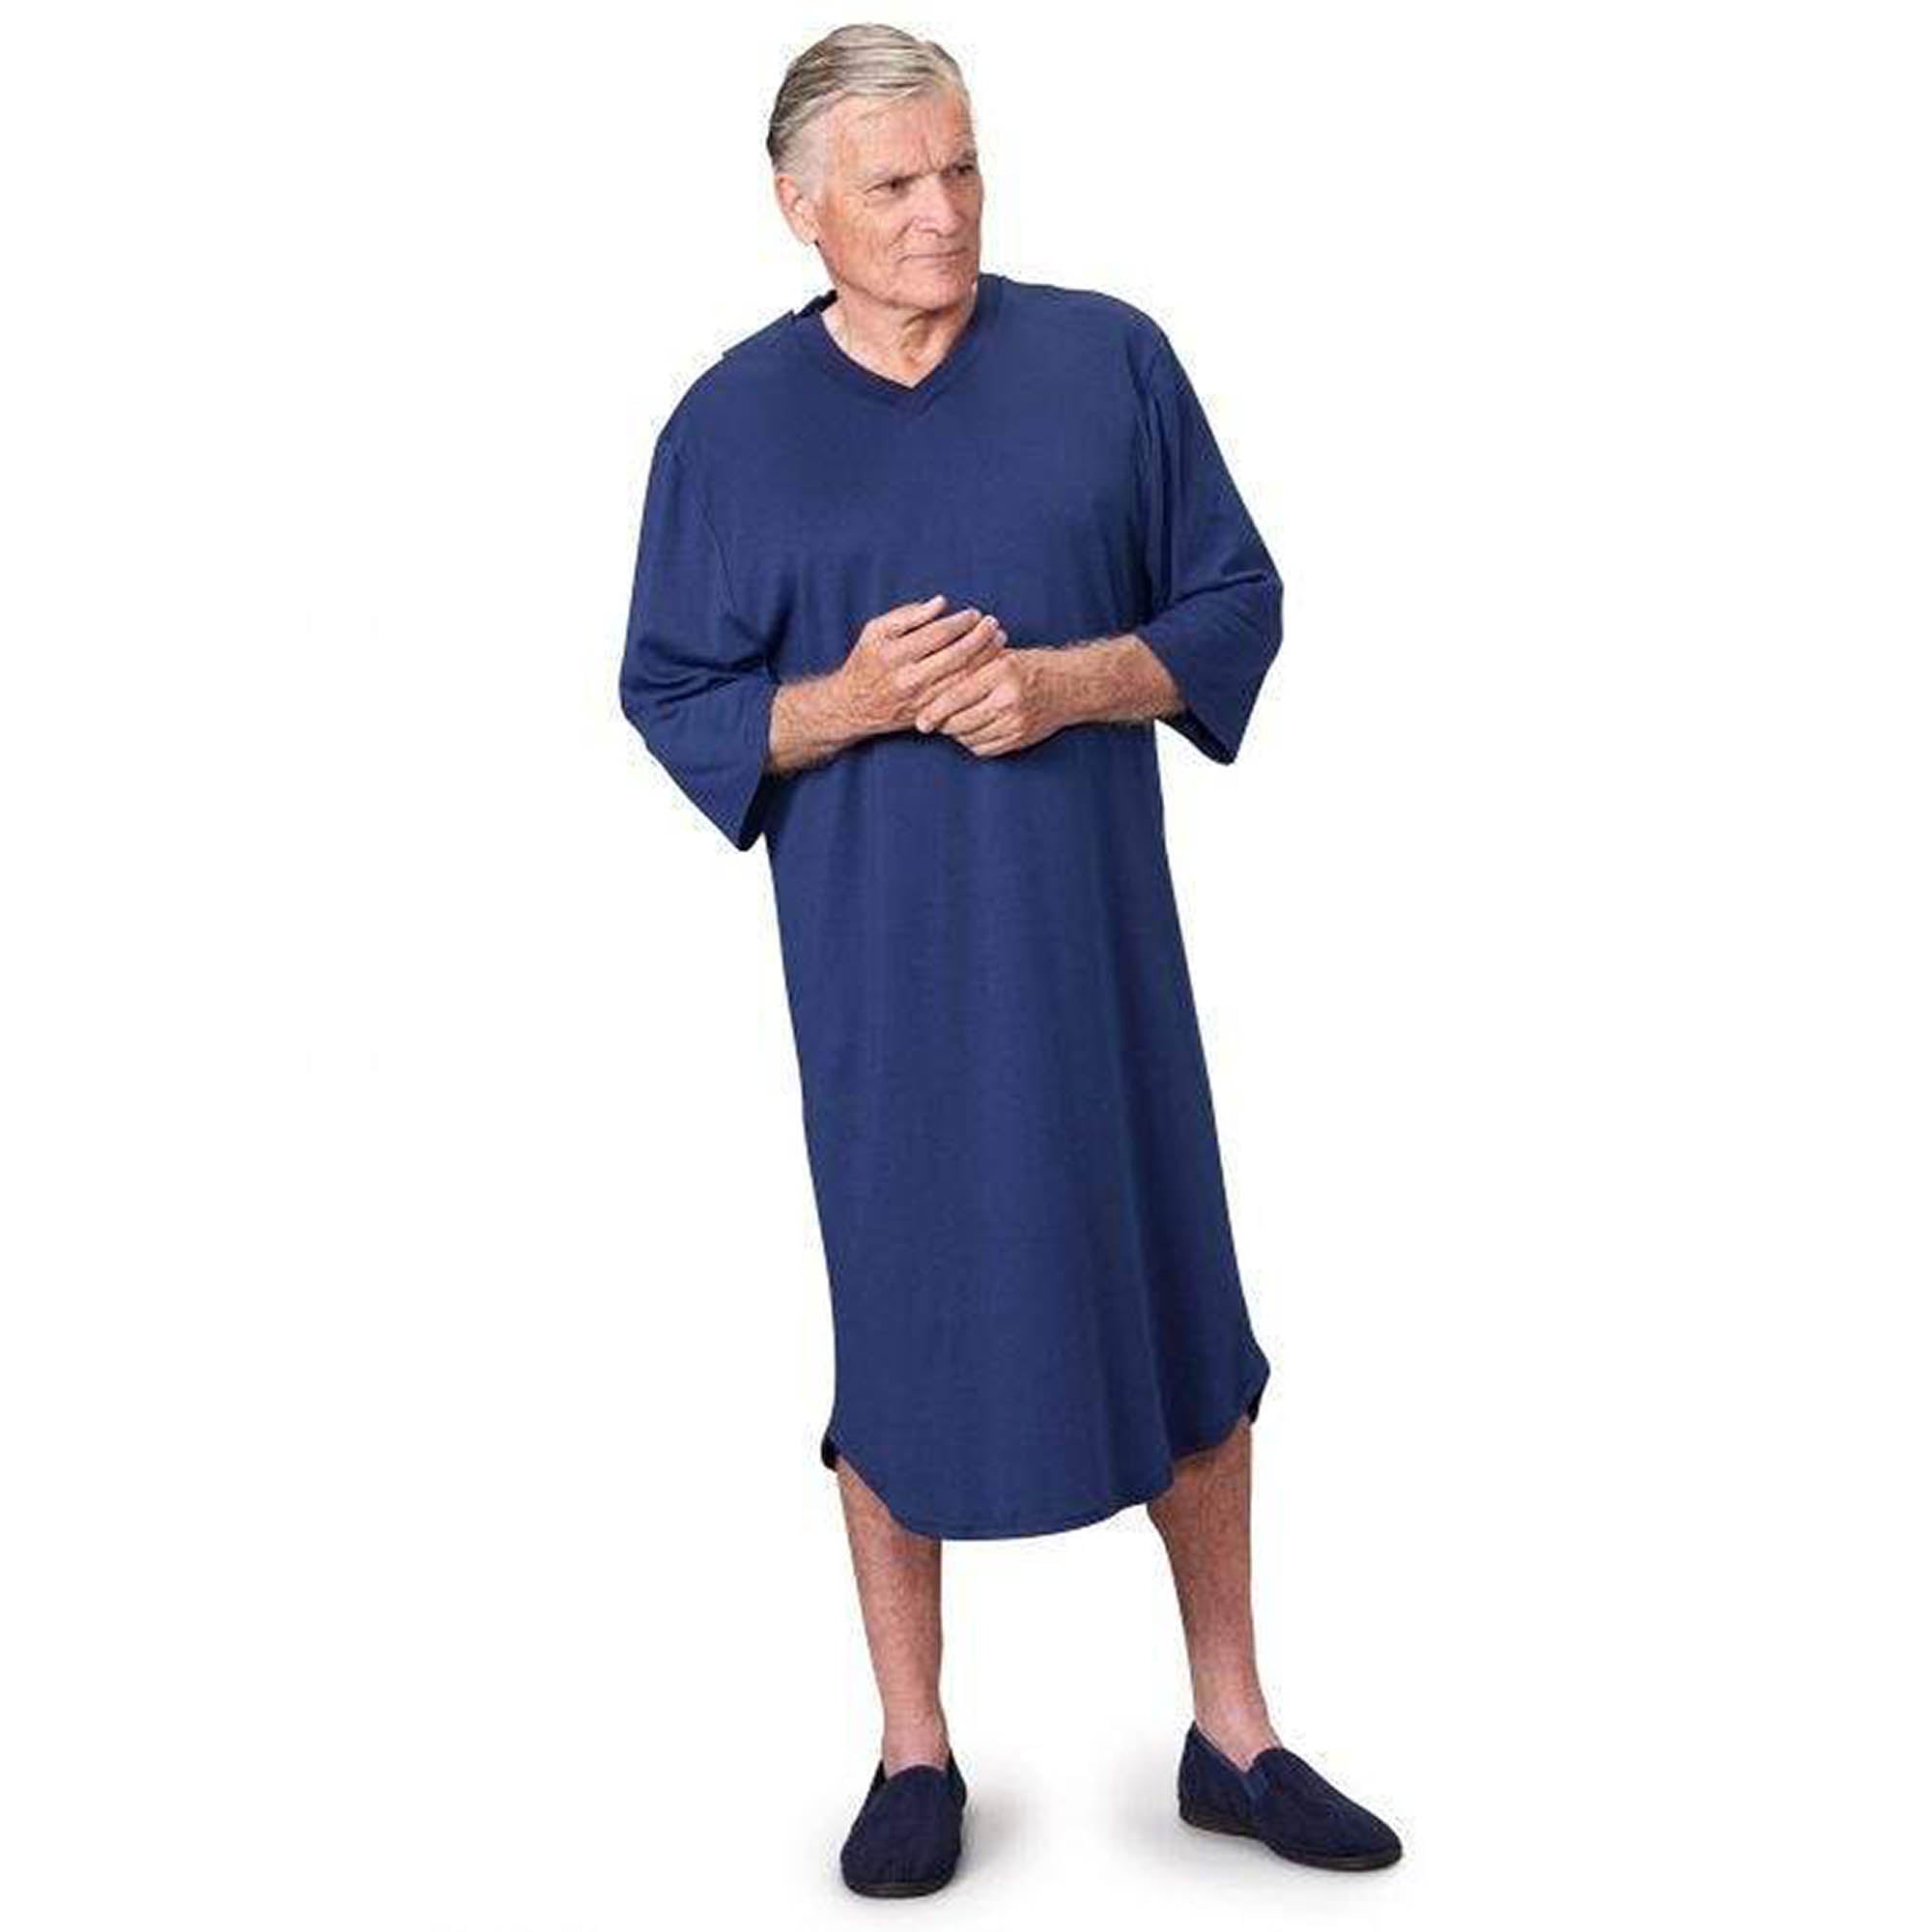 Silverts Men's Open Back Antimicrobial Nightgown - Royal - S